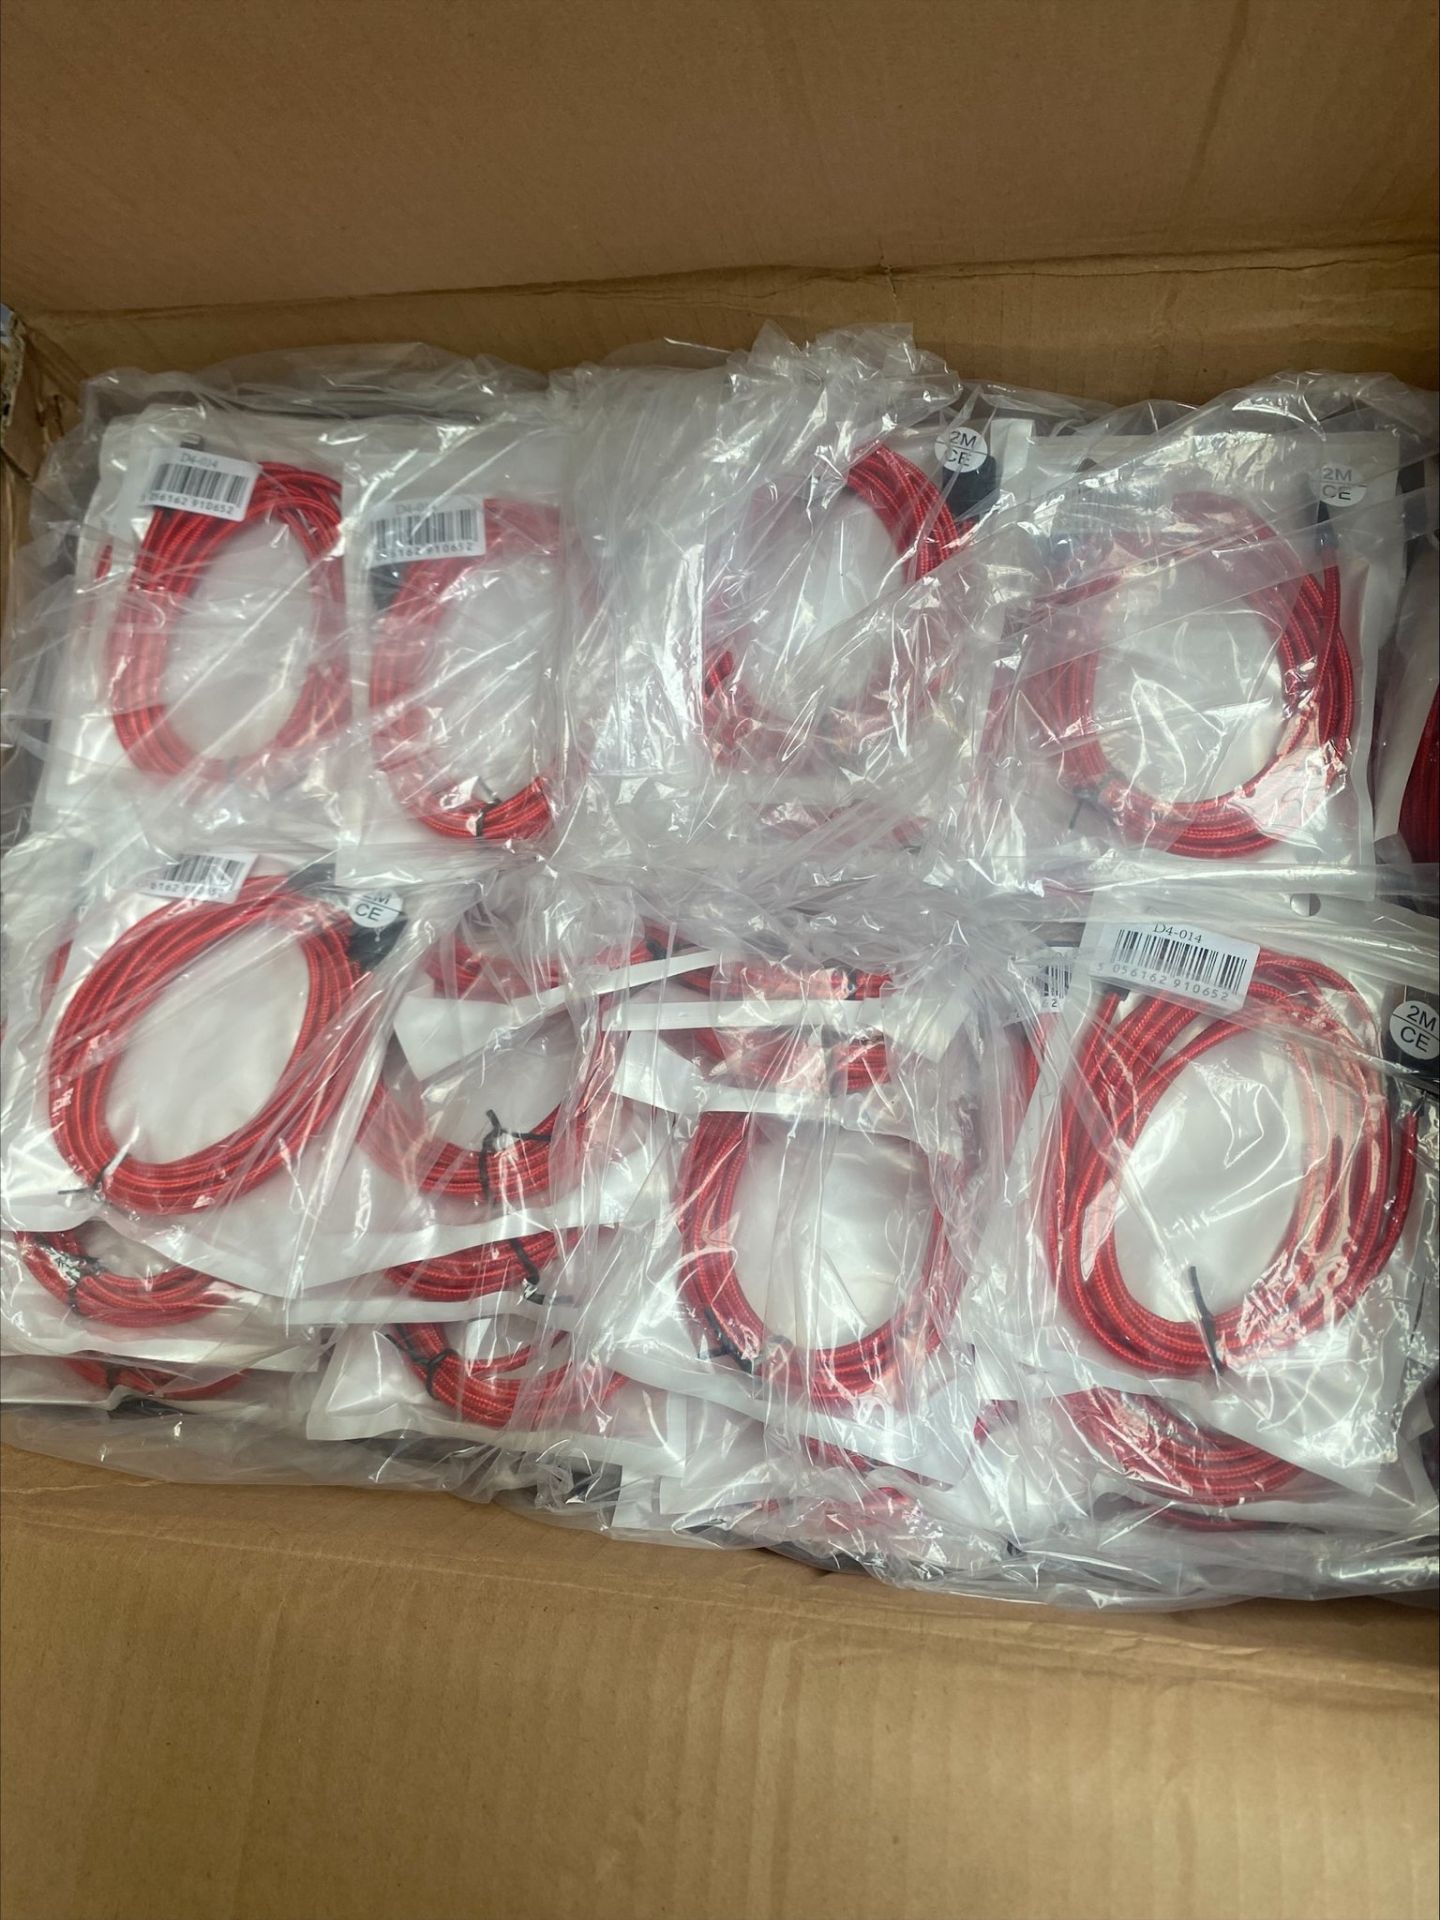 Joblot 50K Units iPhone, Samsung, Airpod, Apple Watch, Charging Cables, Phone Covers Accessories - Image 39 of 52